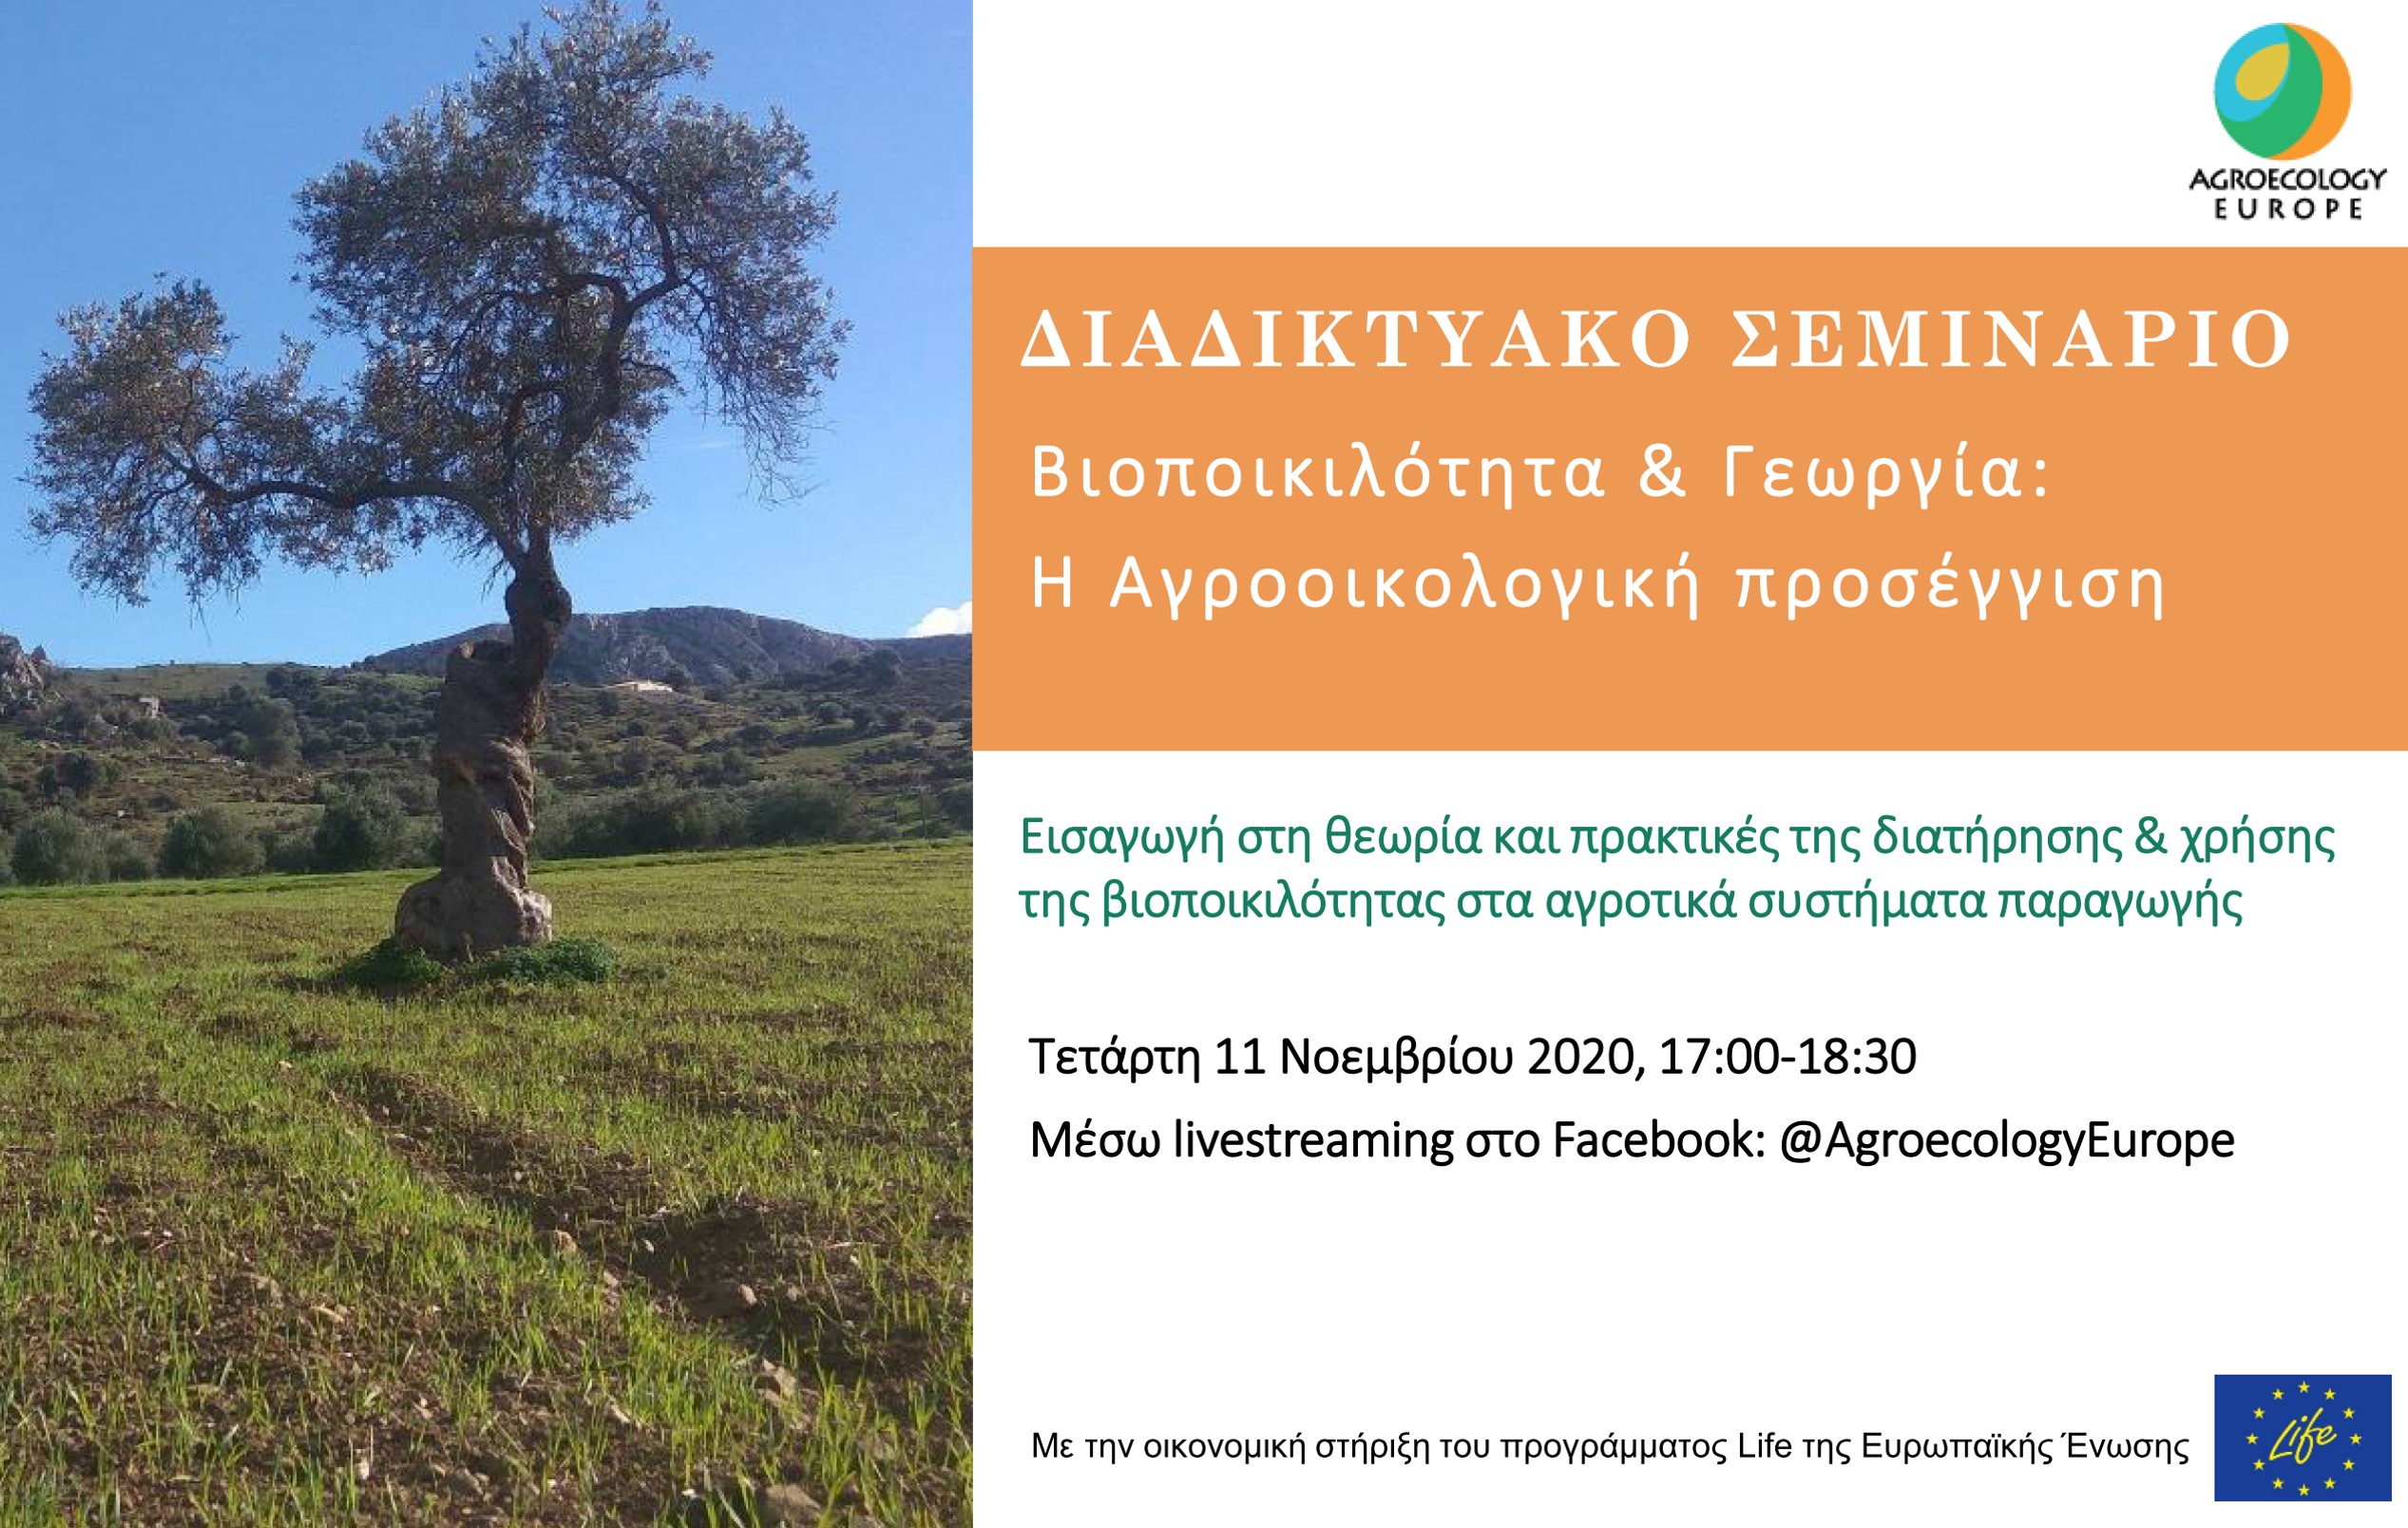 AEEU Webinar “Biodiversity and Agriculture: The Agroecological Approach ” held on Wednesday 11th of November 2020 in Greek on our Facebook page!